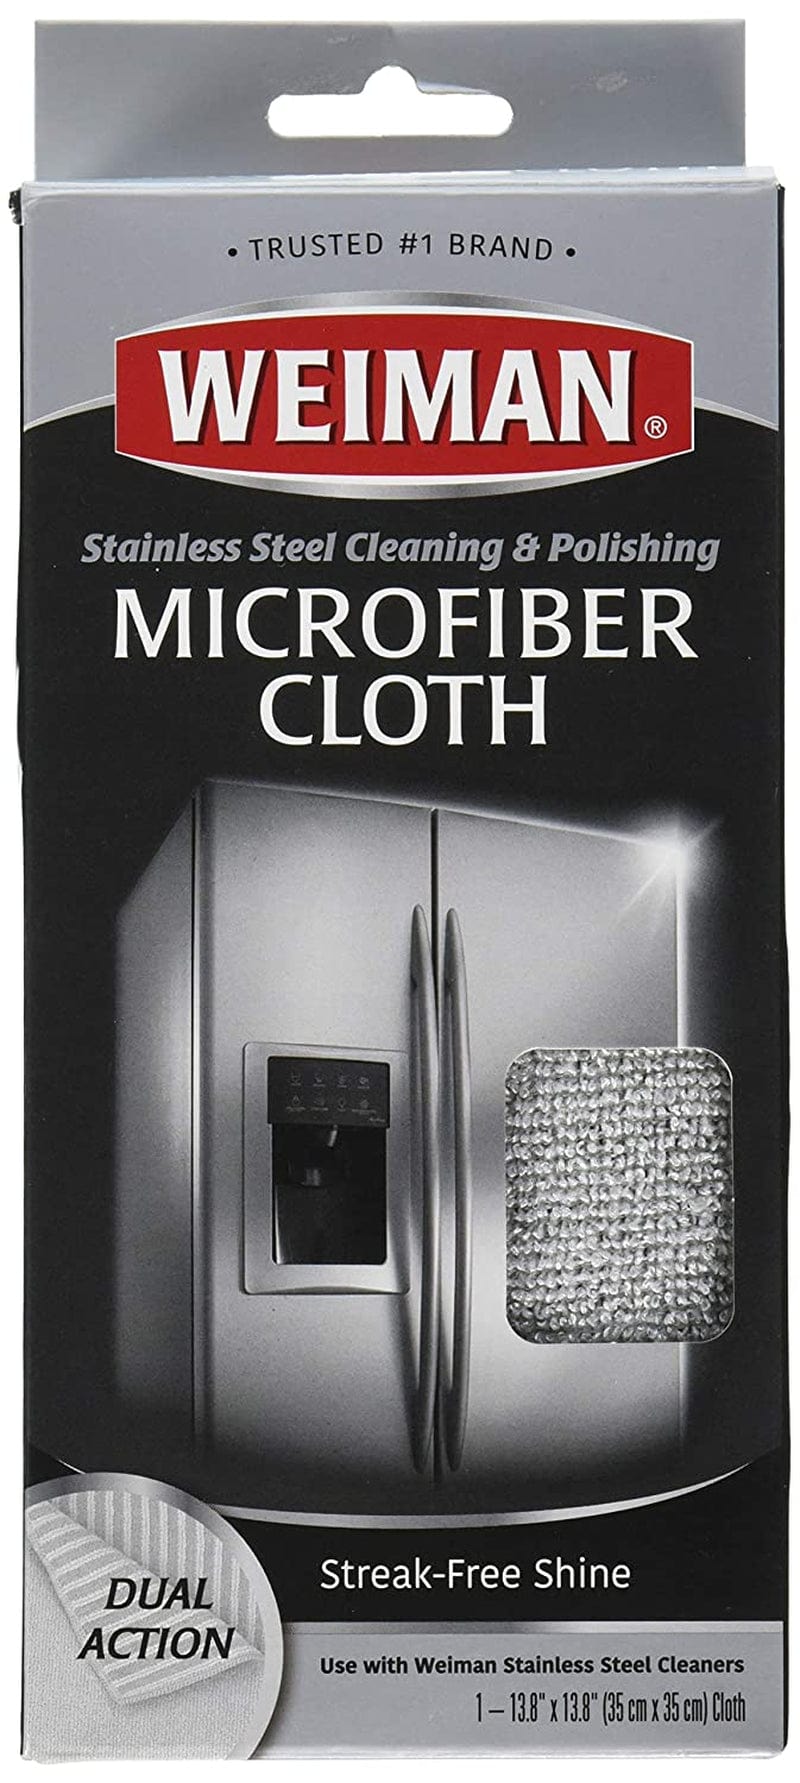 Weiman Microfiber Cloth for Stainless Steel - Safely Traps and Removes Dirt, Oil and Grime to Protect from Scratches